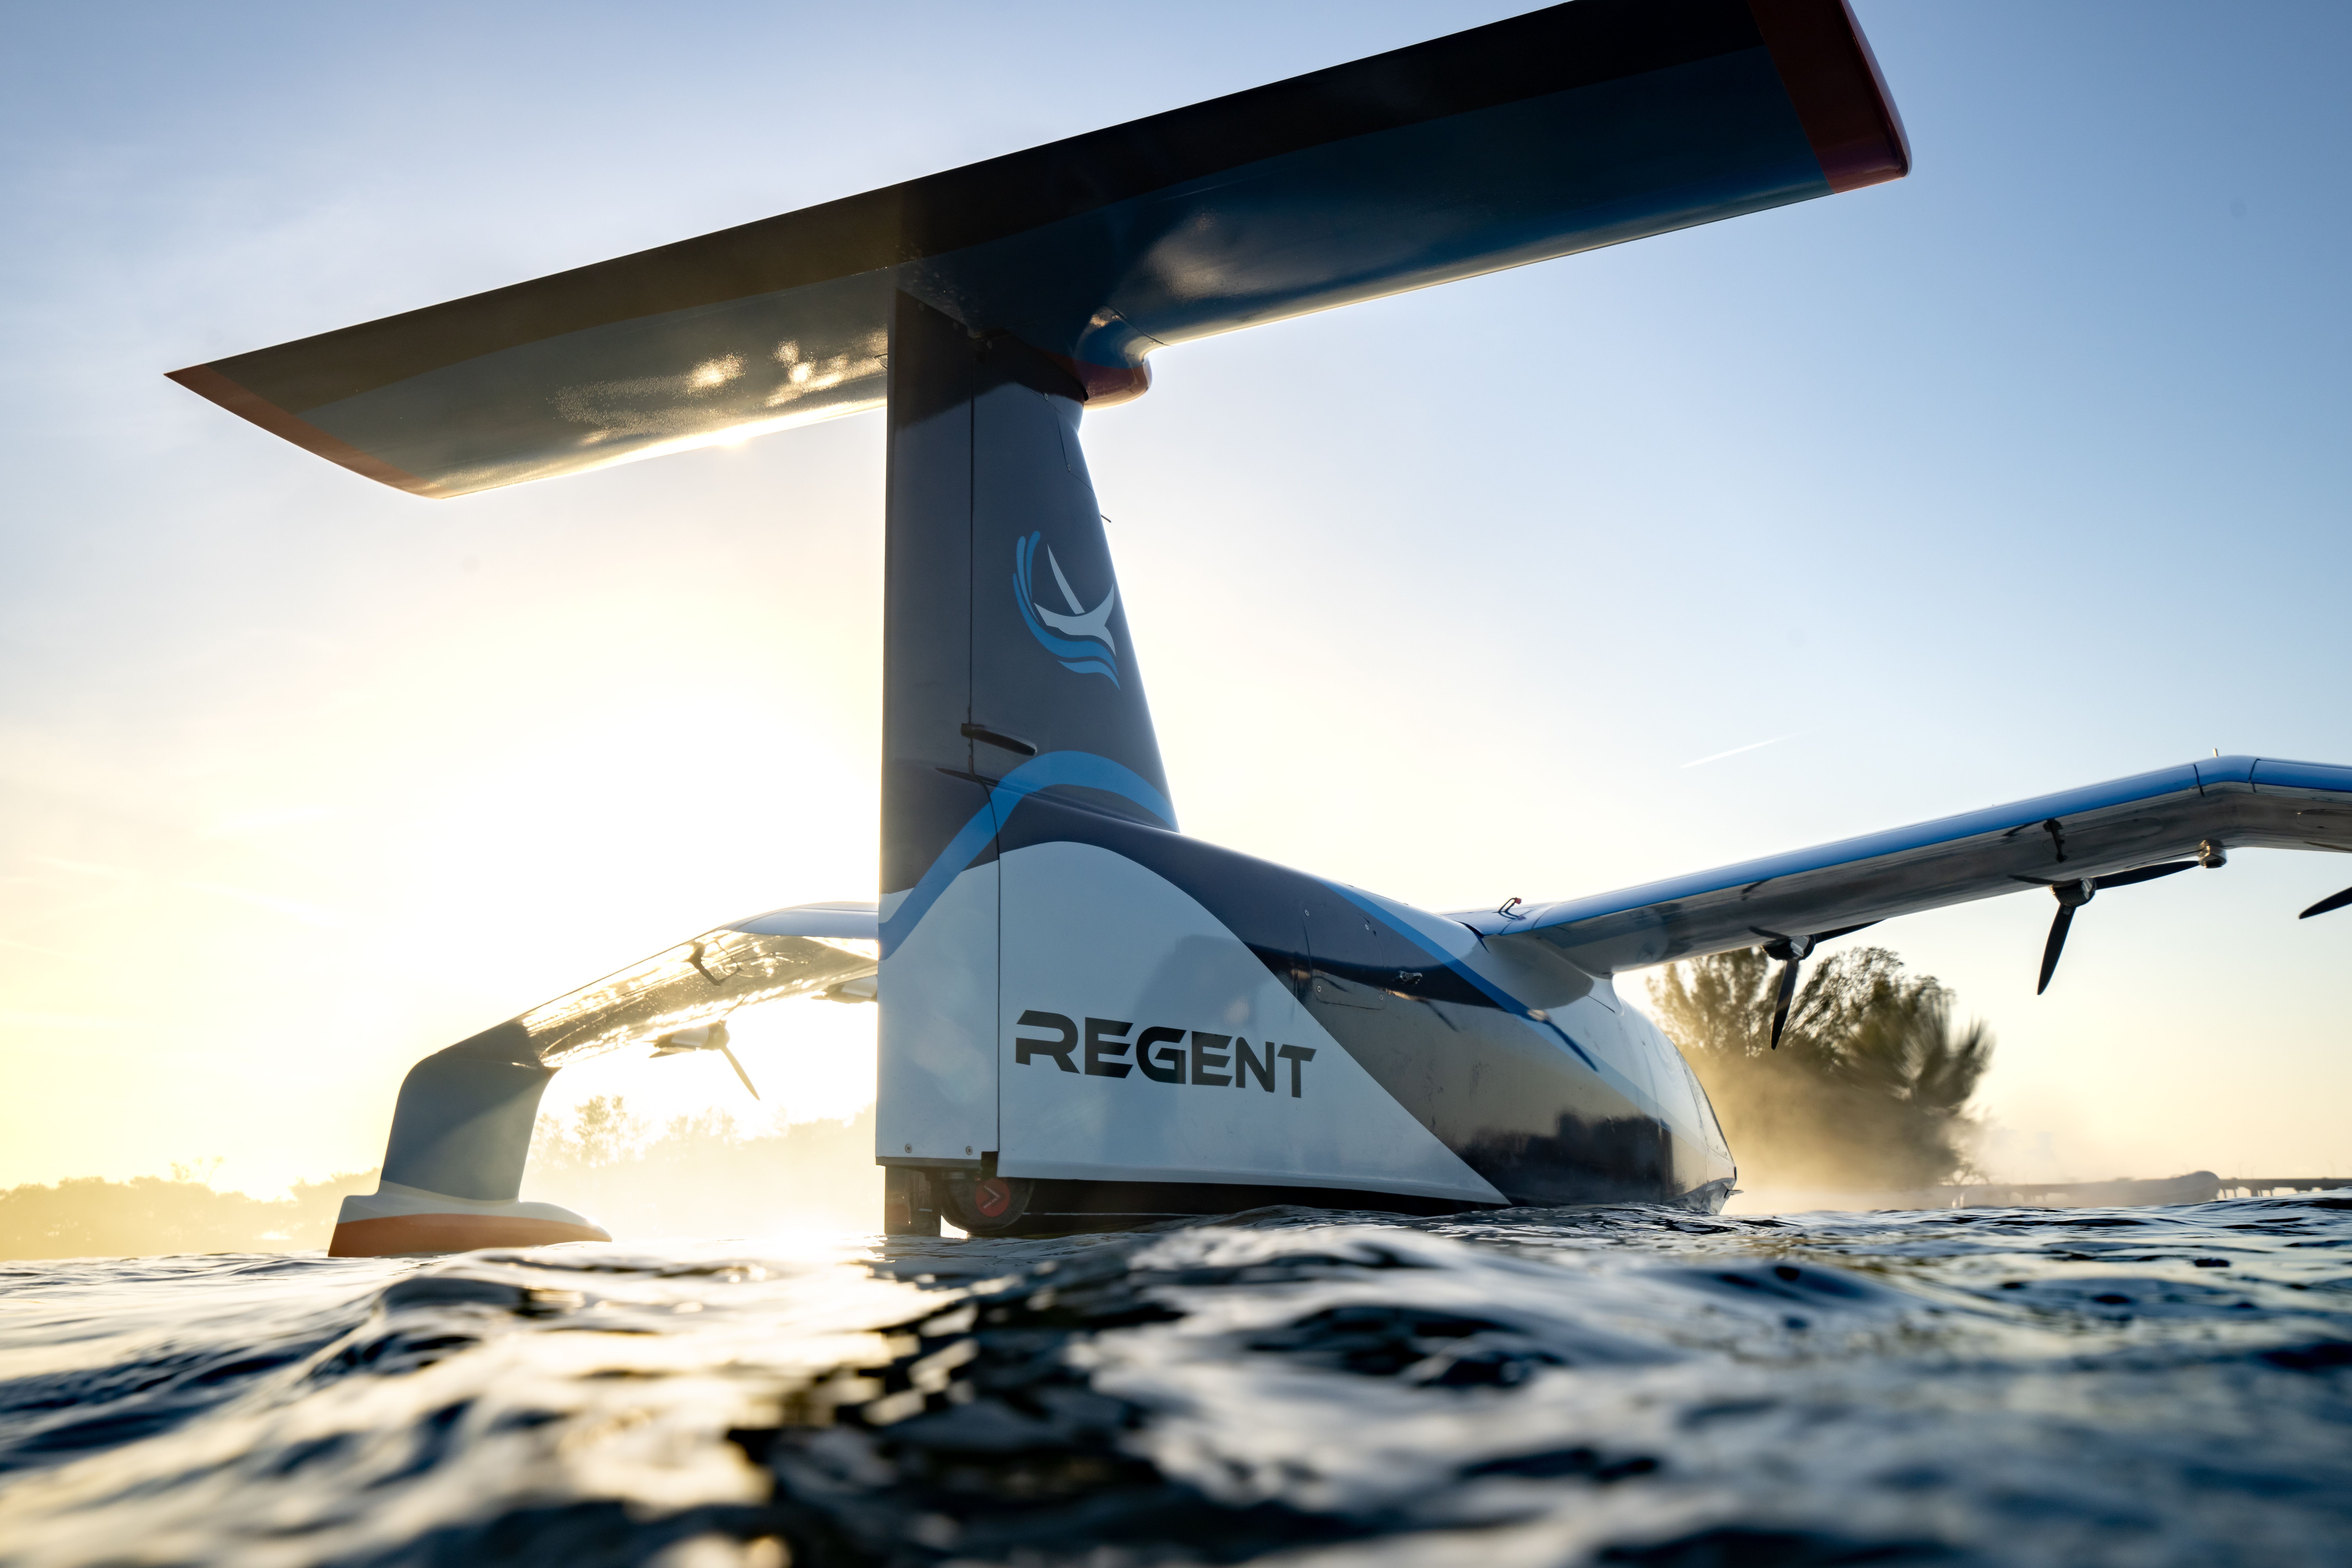 REGENT Technical Demonstrator Seaglider on the water.